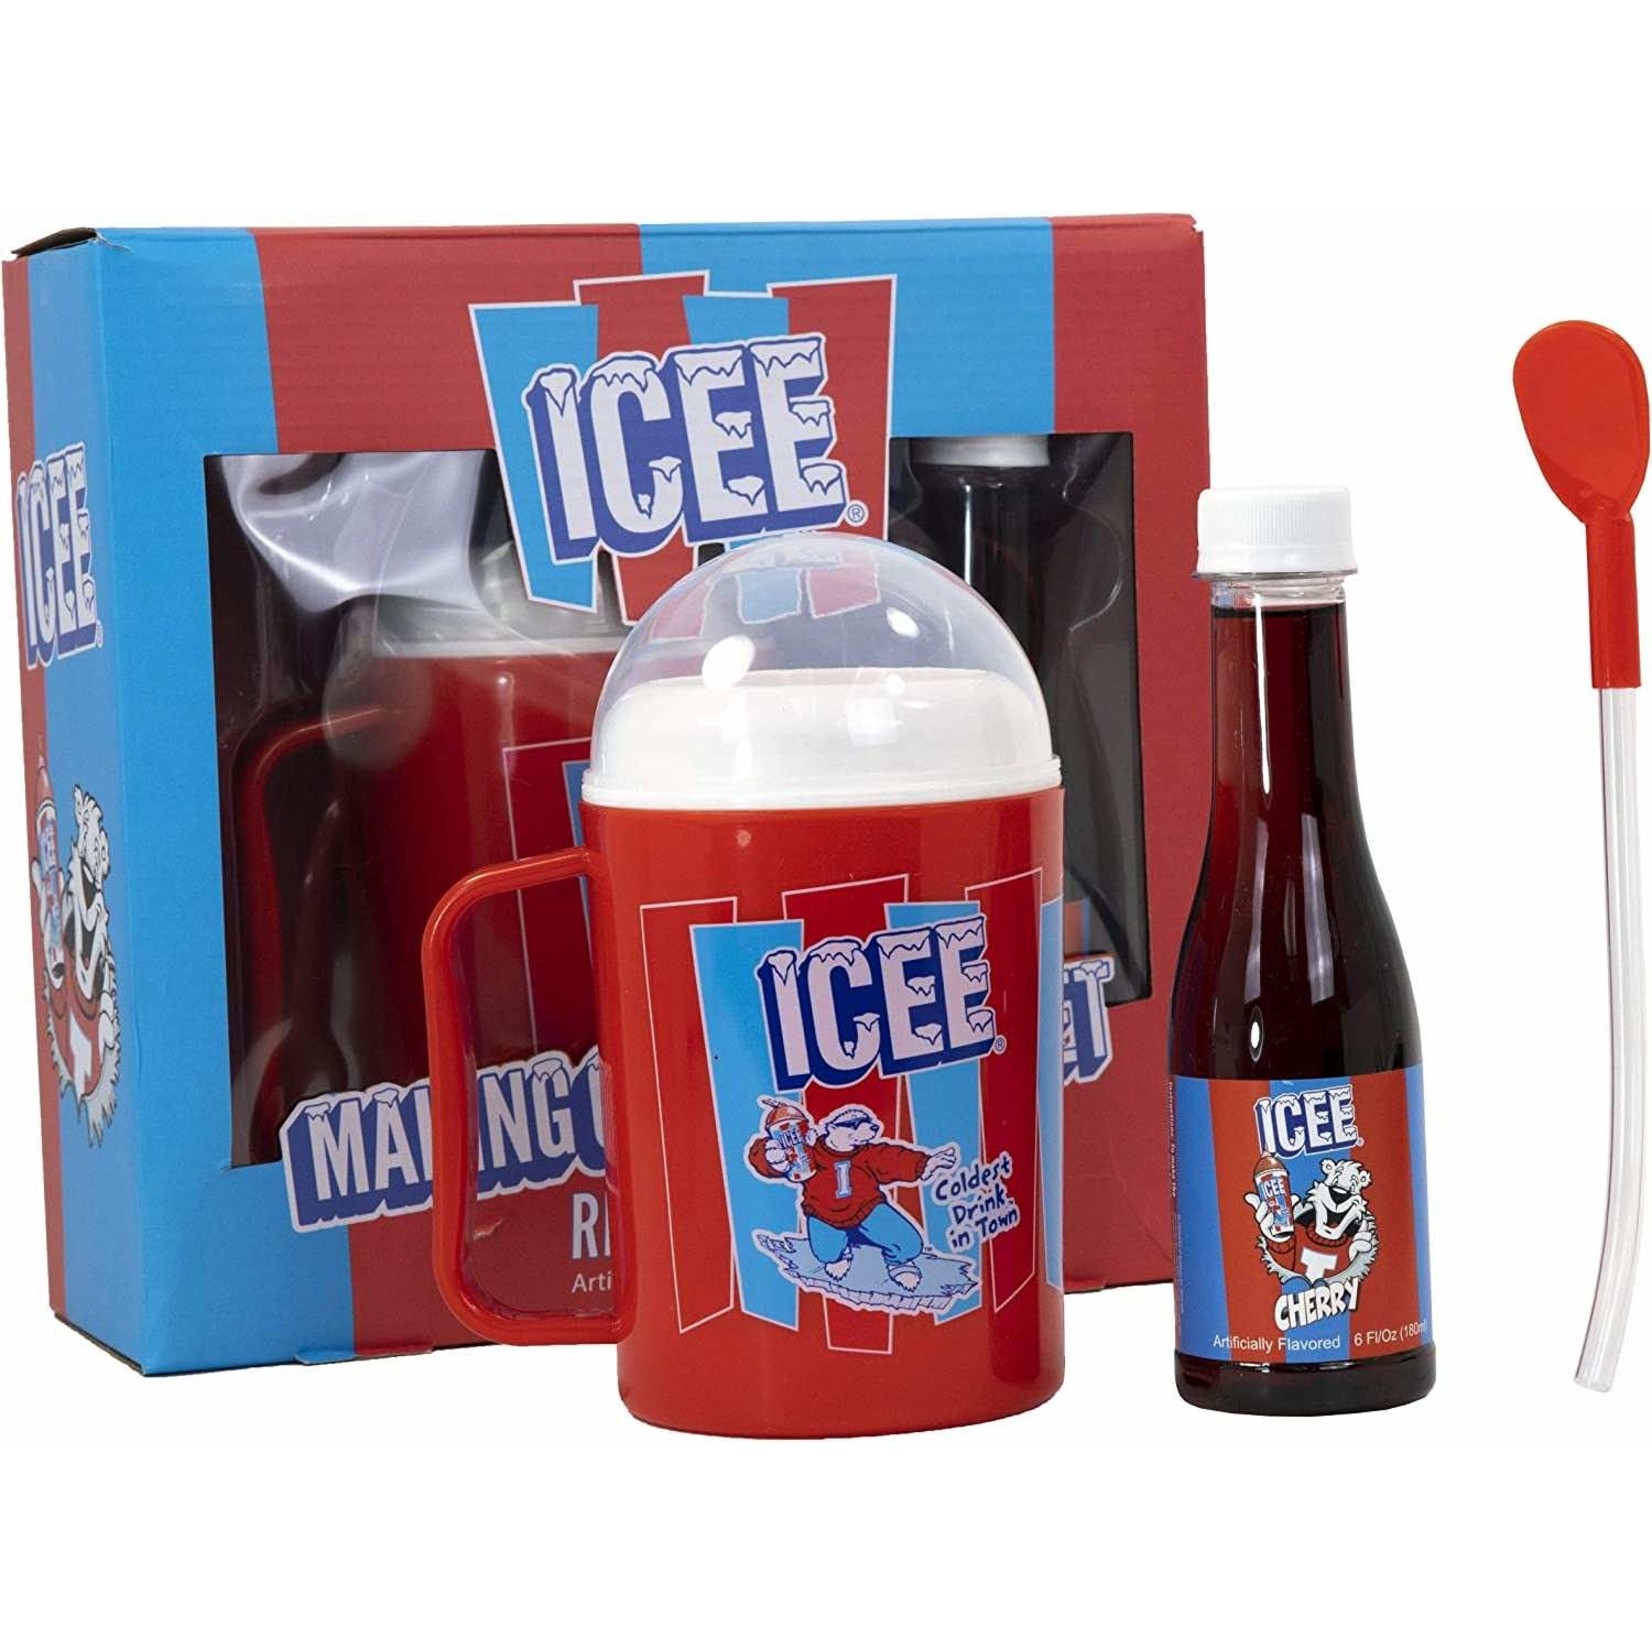 Icee Making Cup and Syrup Set - Red Cherry